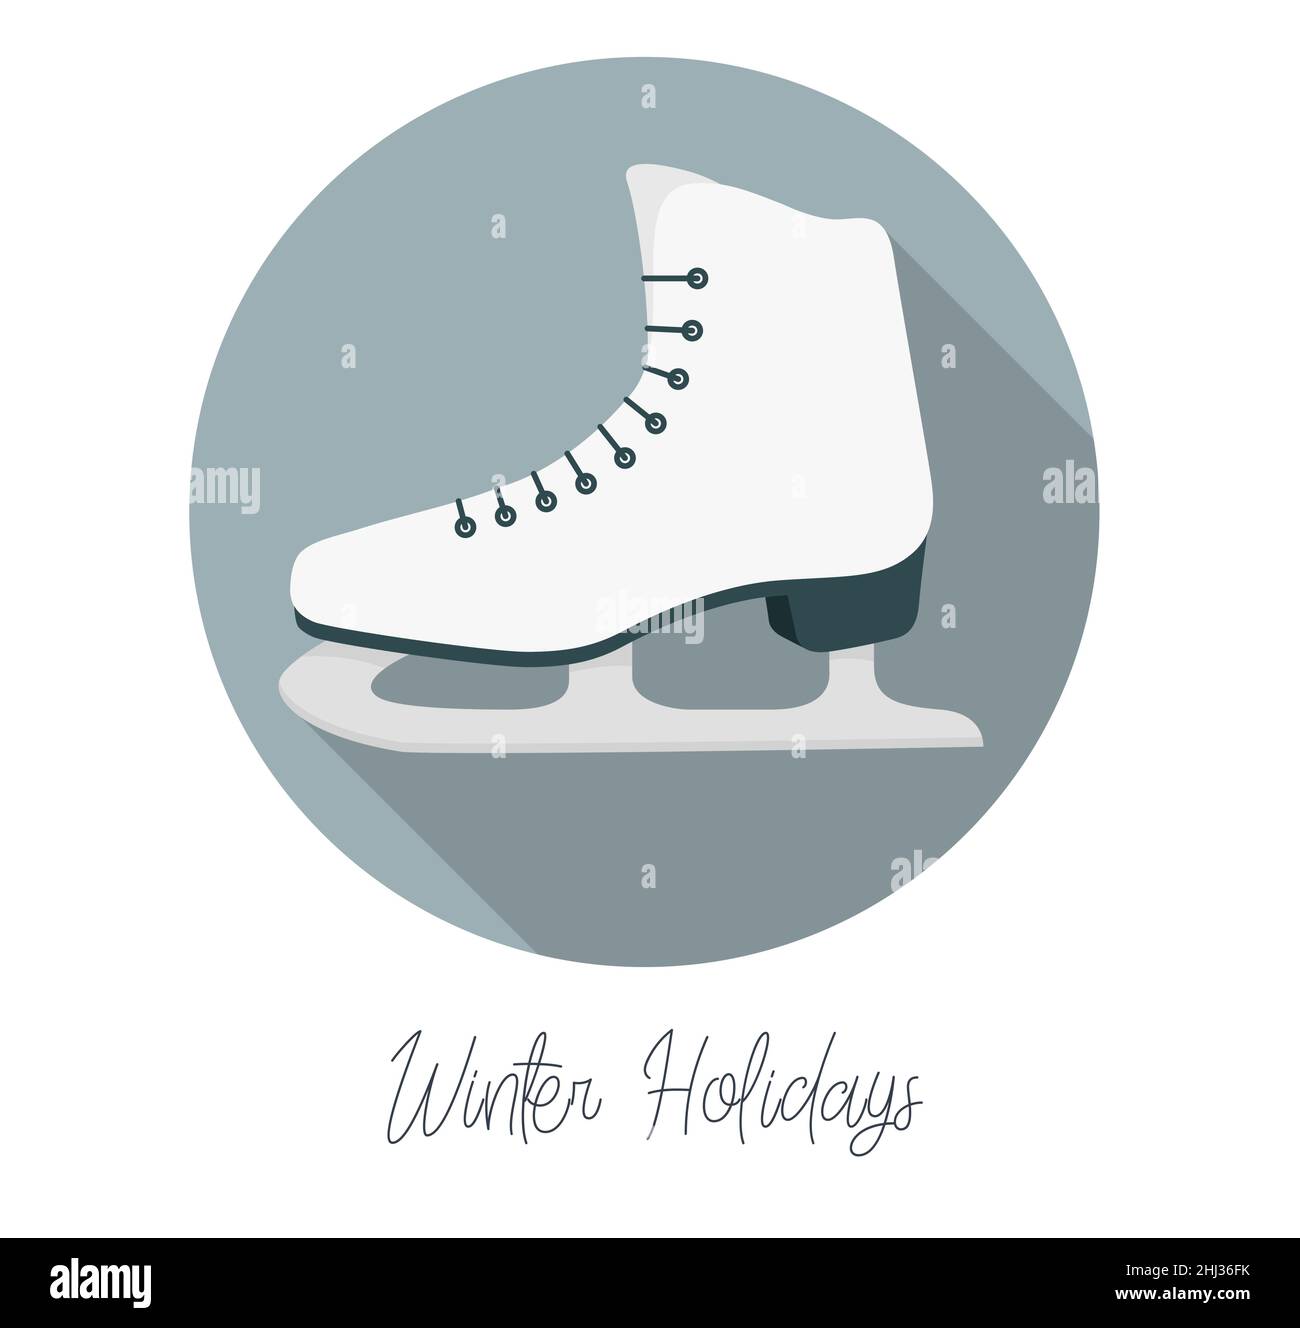 Ice skating Shoes - Stock Icon as EPS 10 File Stock Vector